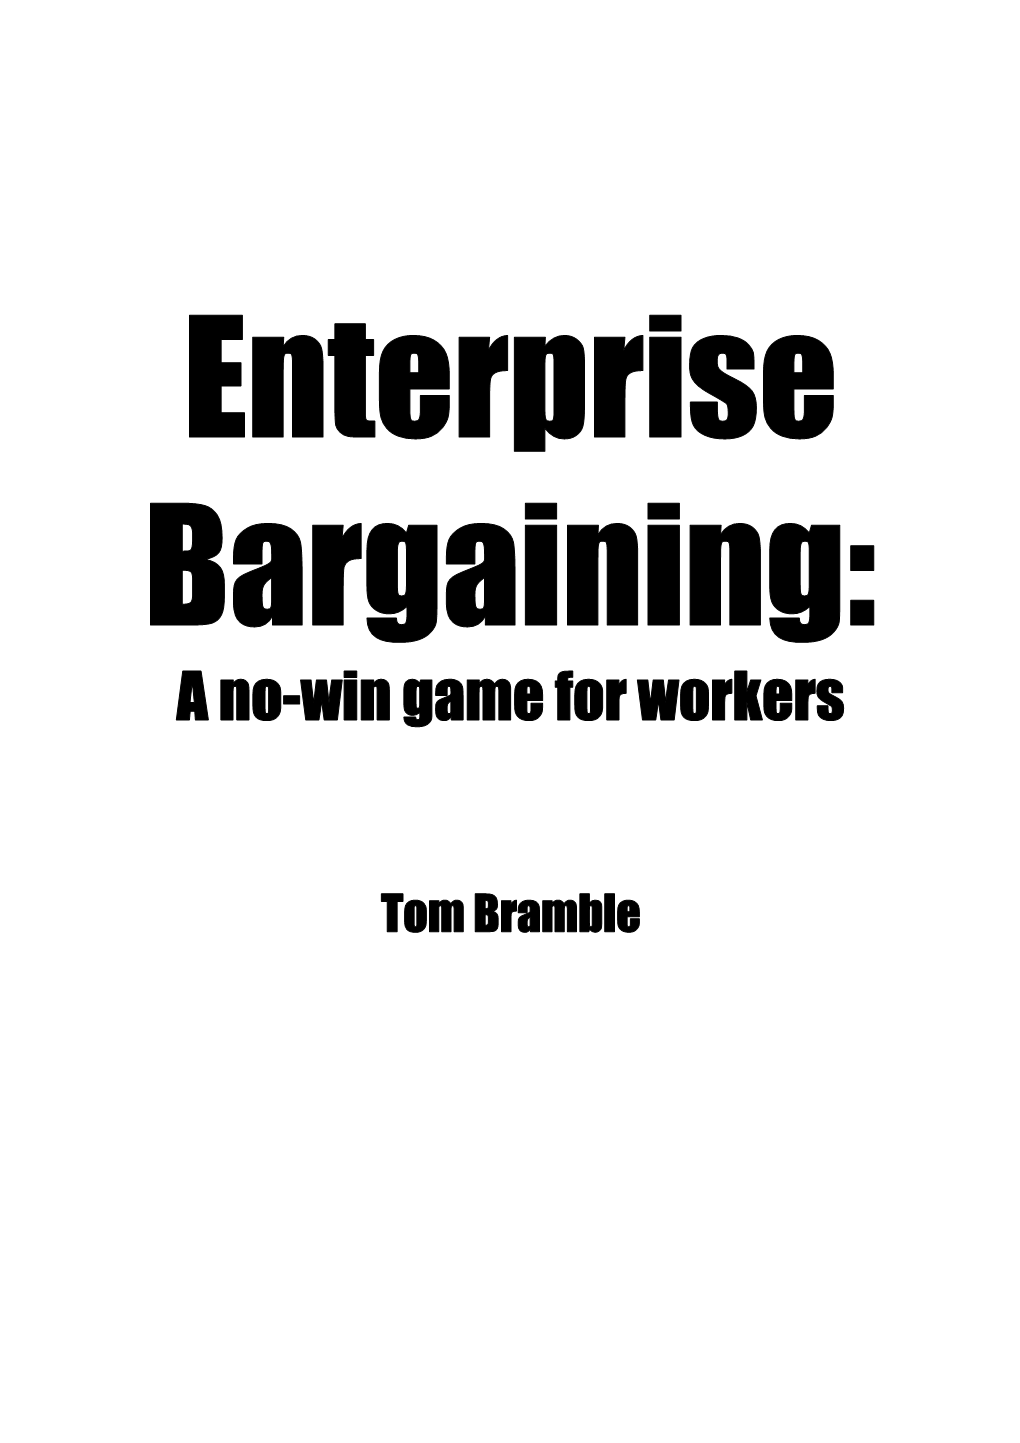 Enterprise Bargaining: a No-Win Game for Workers